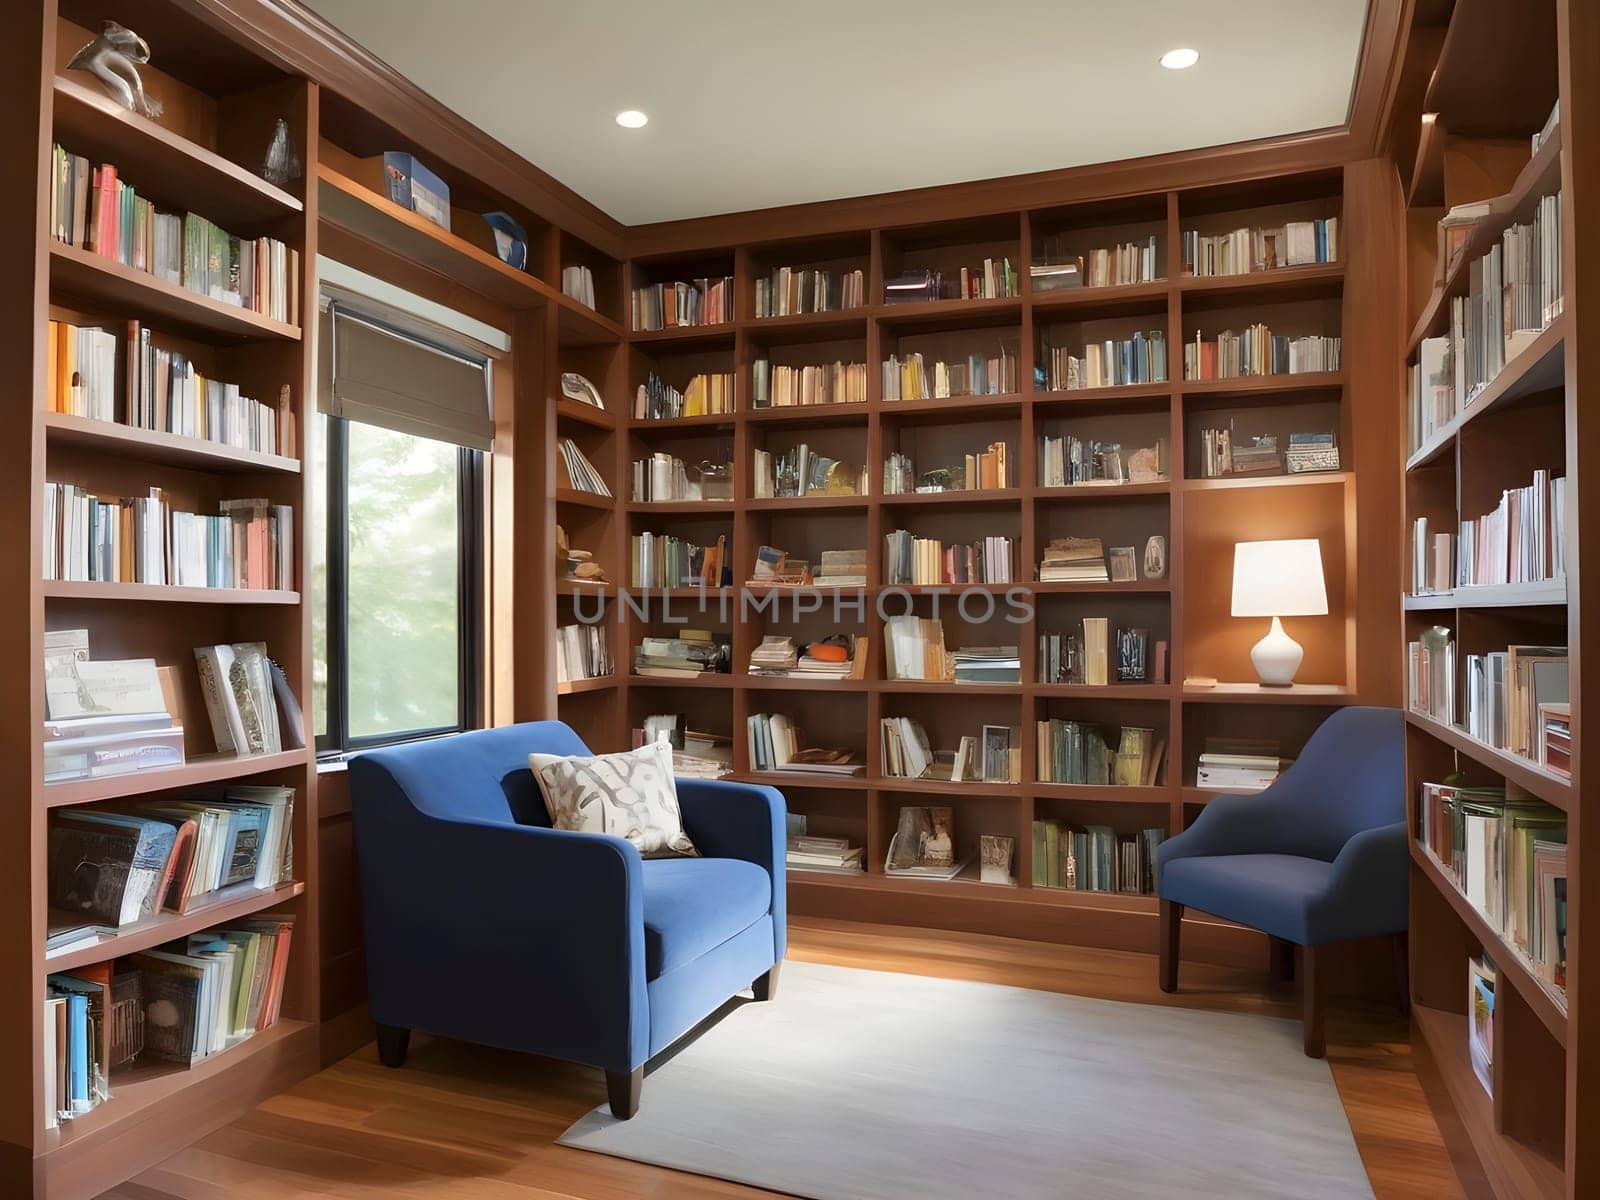 Exploring Eco-Wisdom. Home Libraries and Learning Nooks Focused on Sustainability.